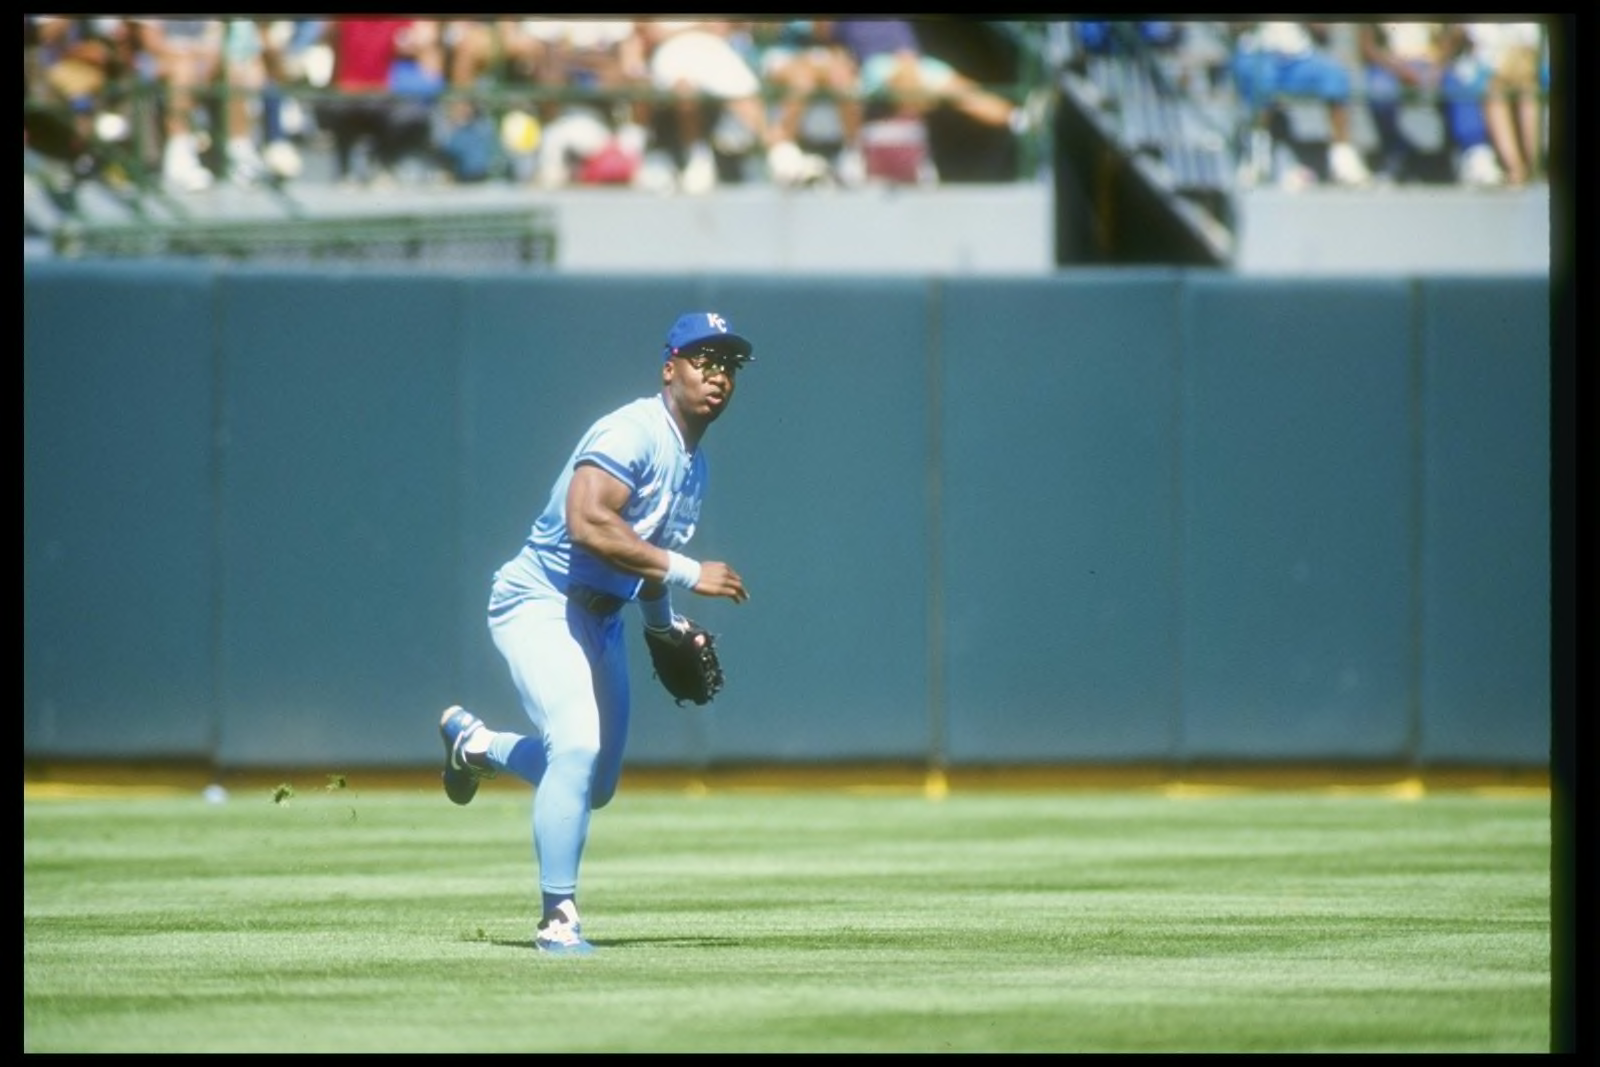 bo jackson royals outfield